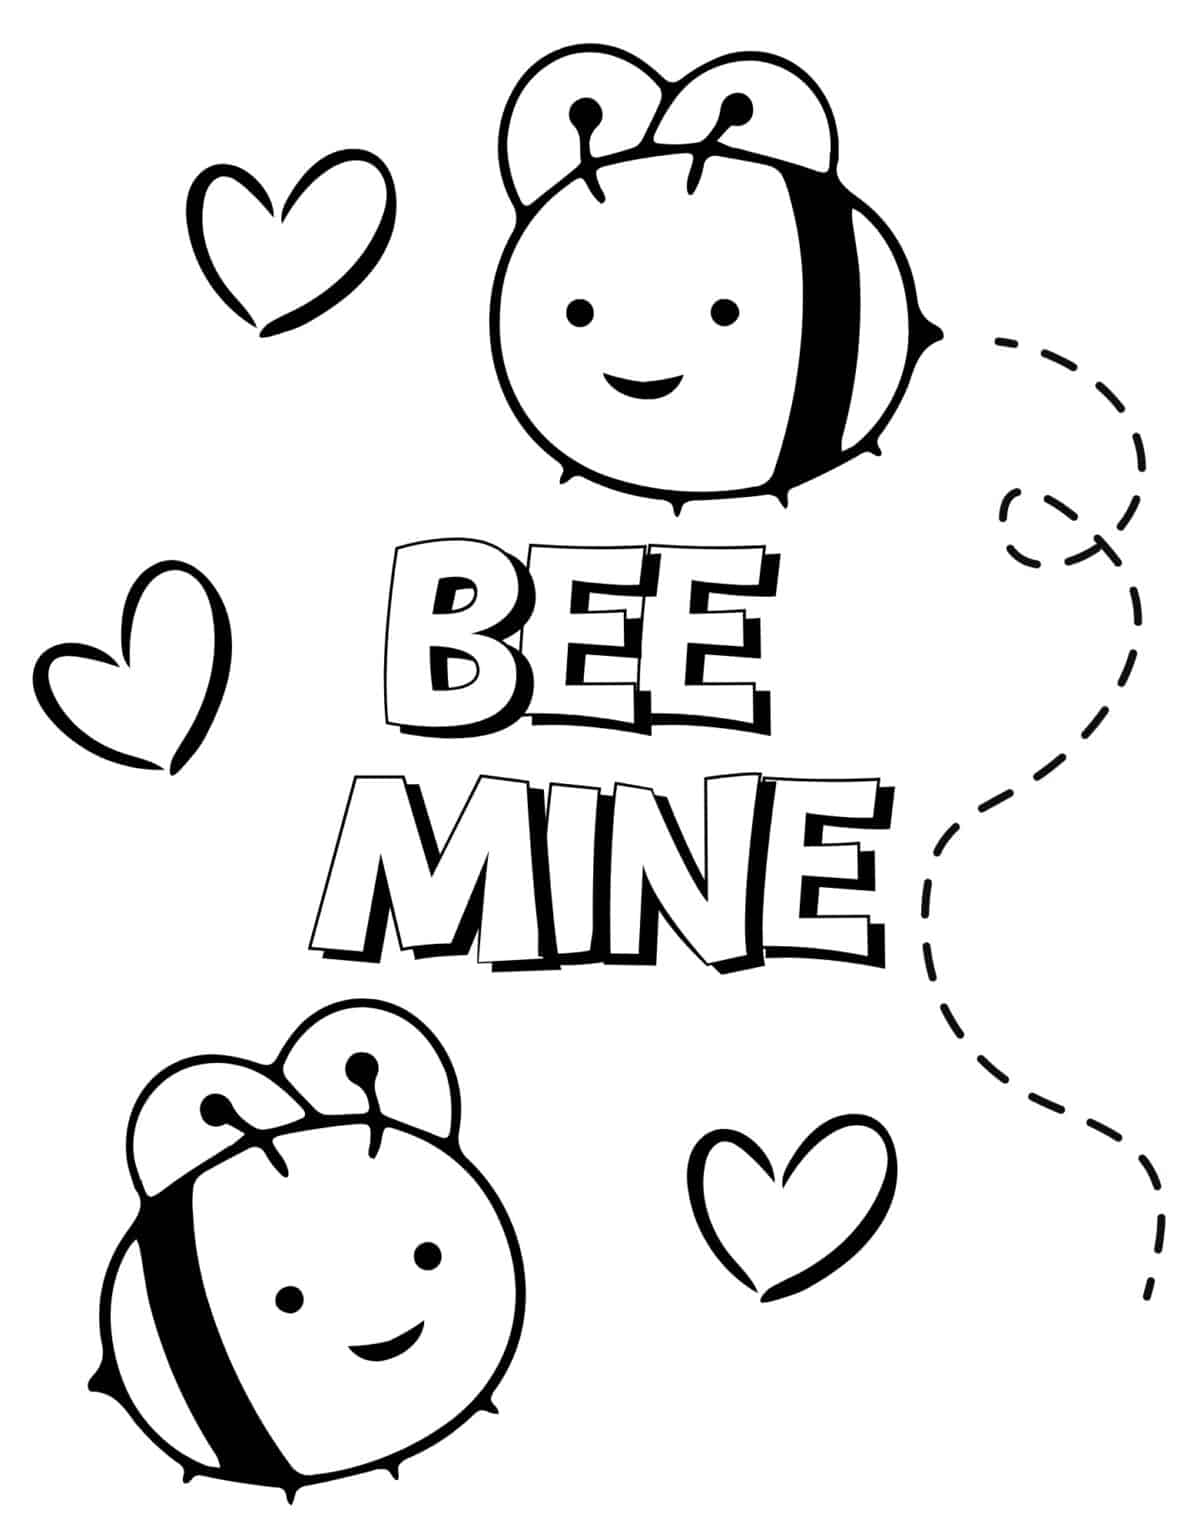 20 Free Valentine's Day Coloring Pages for Kids - Prudent Penny Pincher